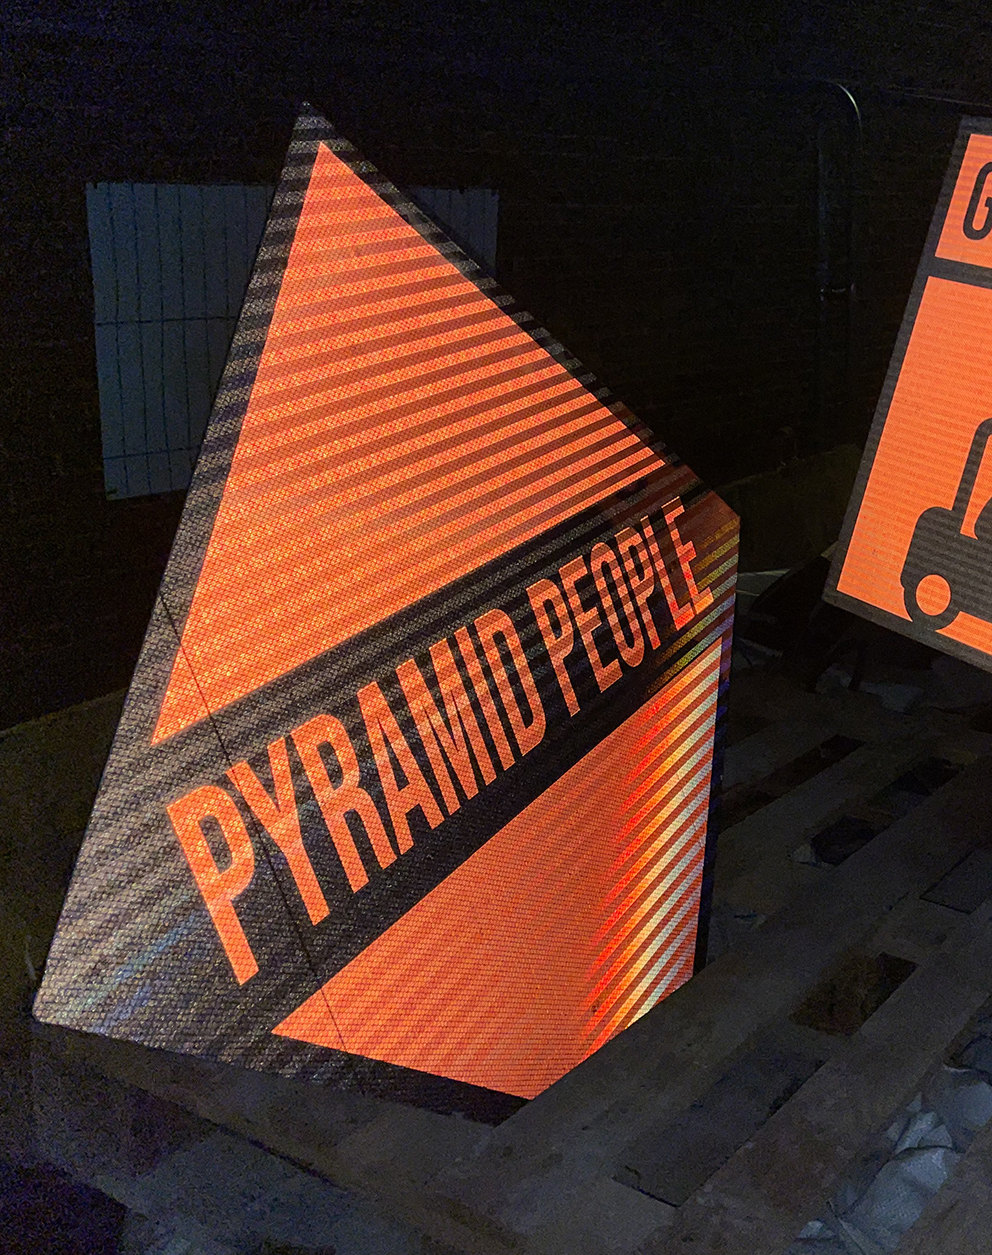 Pyramid People site warning sign